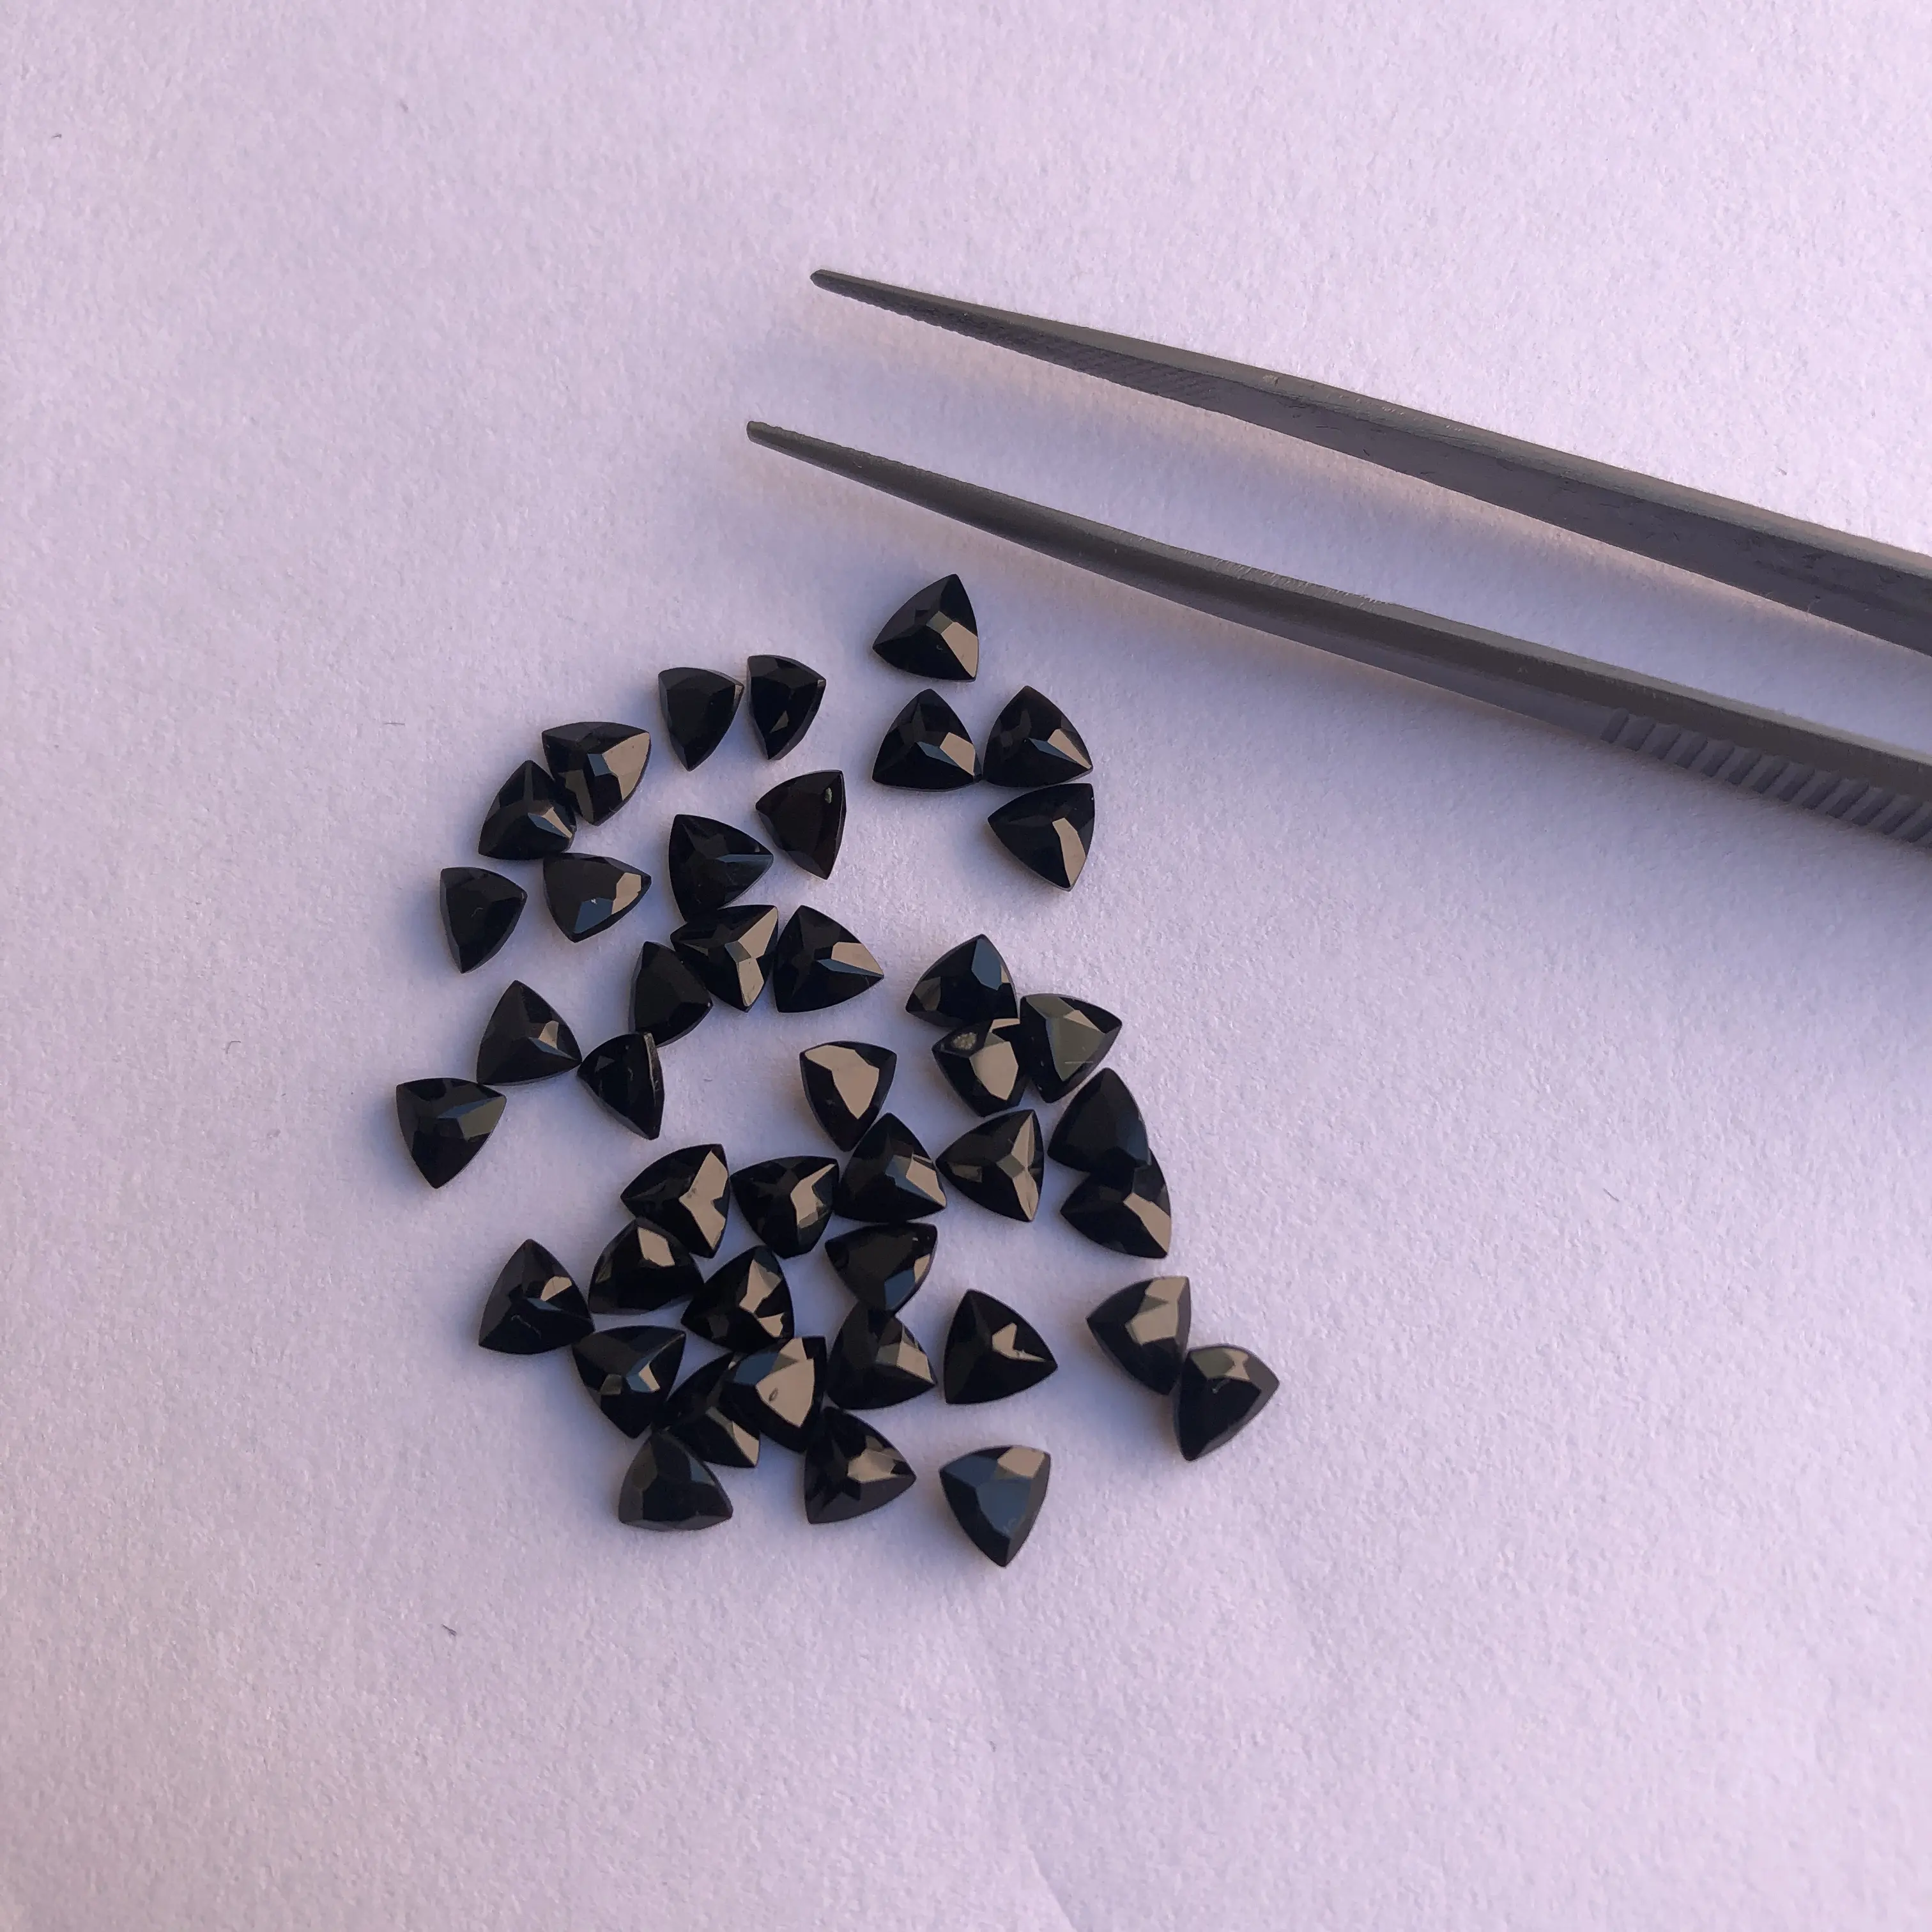 5mm Natural Black Onyx Faceted Trillion Cut Calibrated Gemstones Wholesale Price Loose Stones for Jewelry Setting Regular Sale